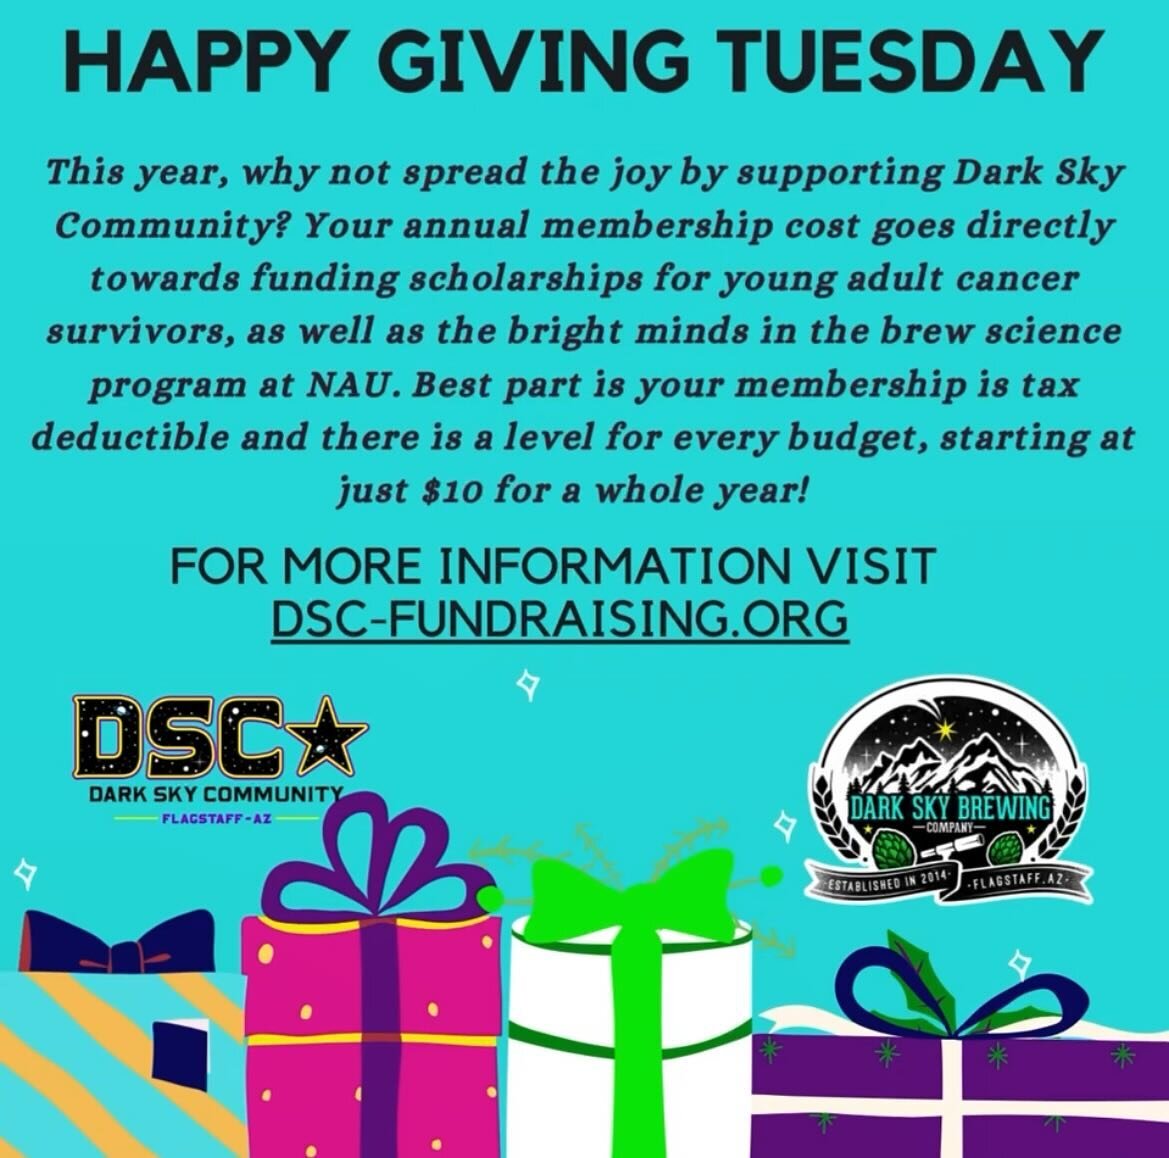 This year for #givingtuesday why not help us spread joy around the state by supporting Dark Sky Community? Your annual membership costs goes directly towards our scholarship programs and is tax deductible! We have membership levels for every budget:
